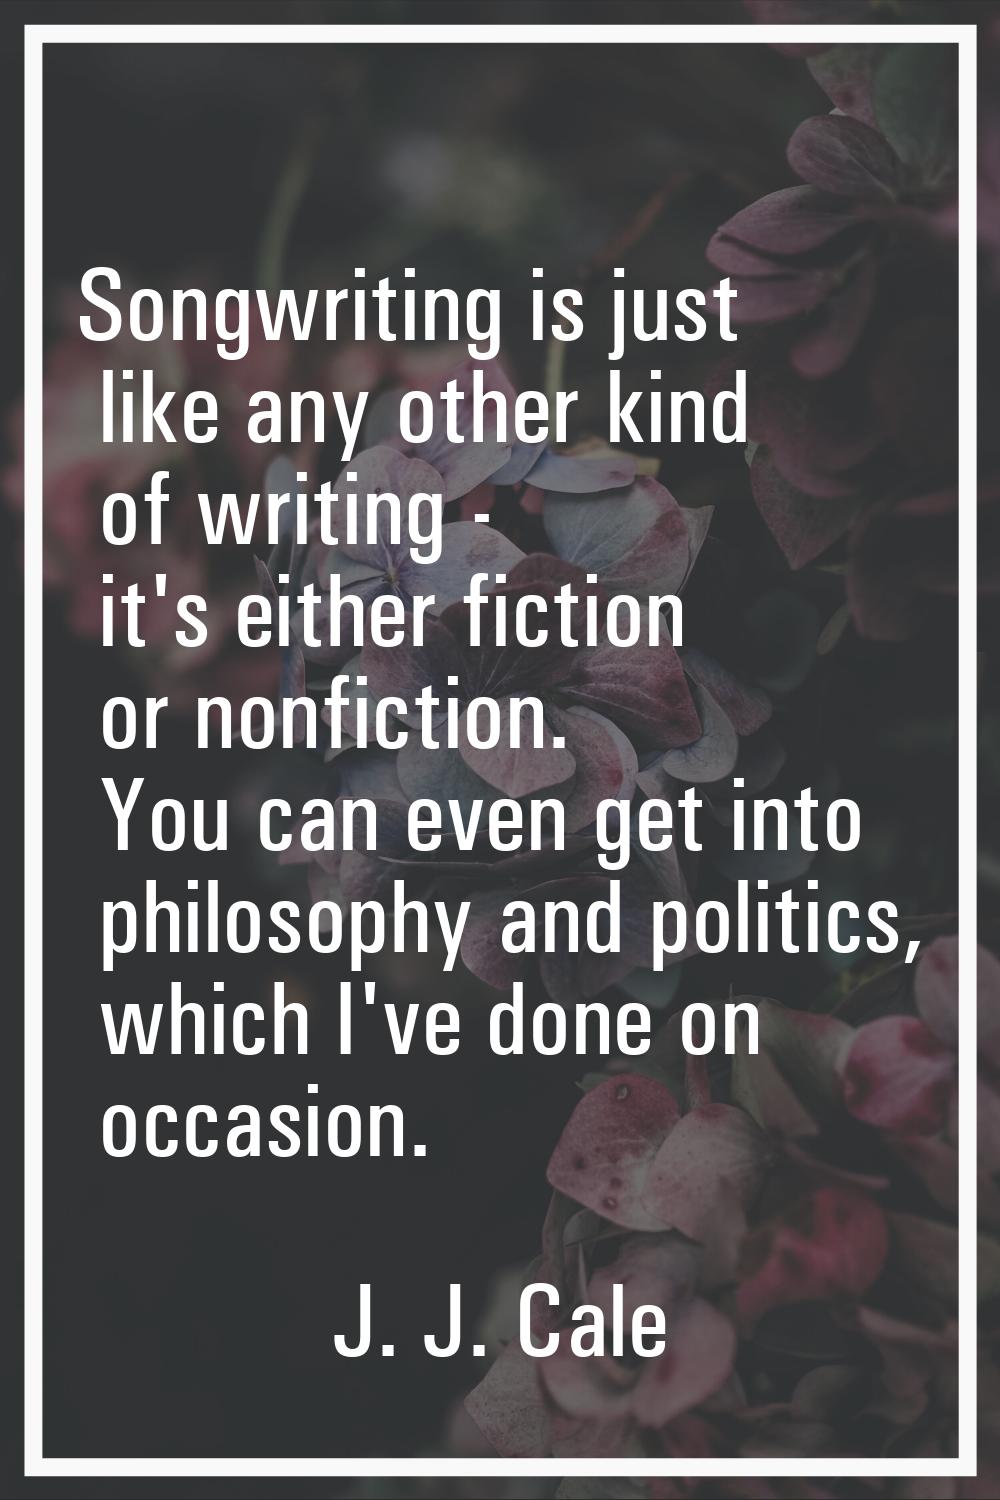 Songwriting is just like any other kind of writing - it's either fiction or nonfiction. You can eve